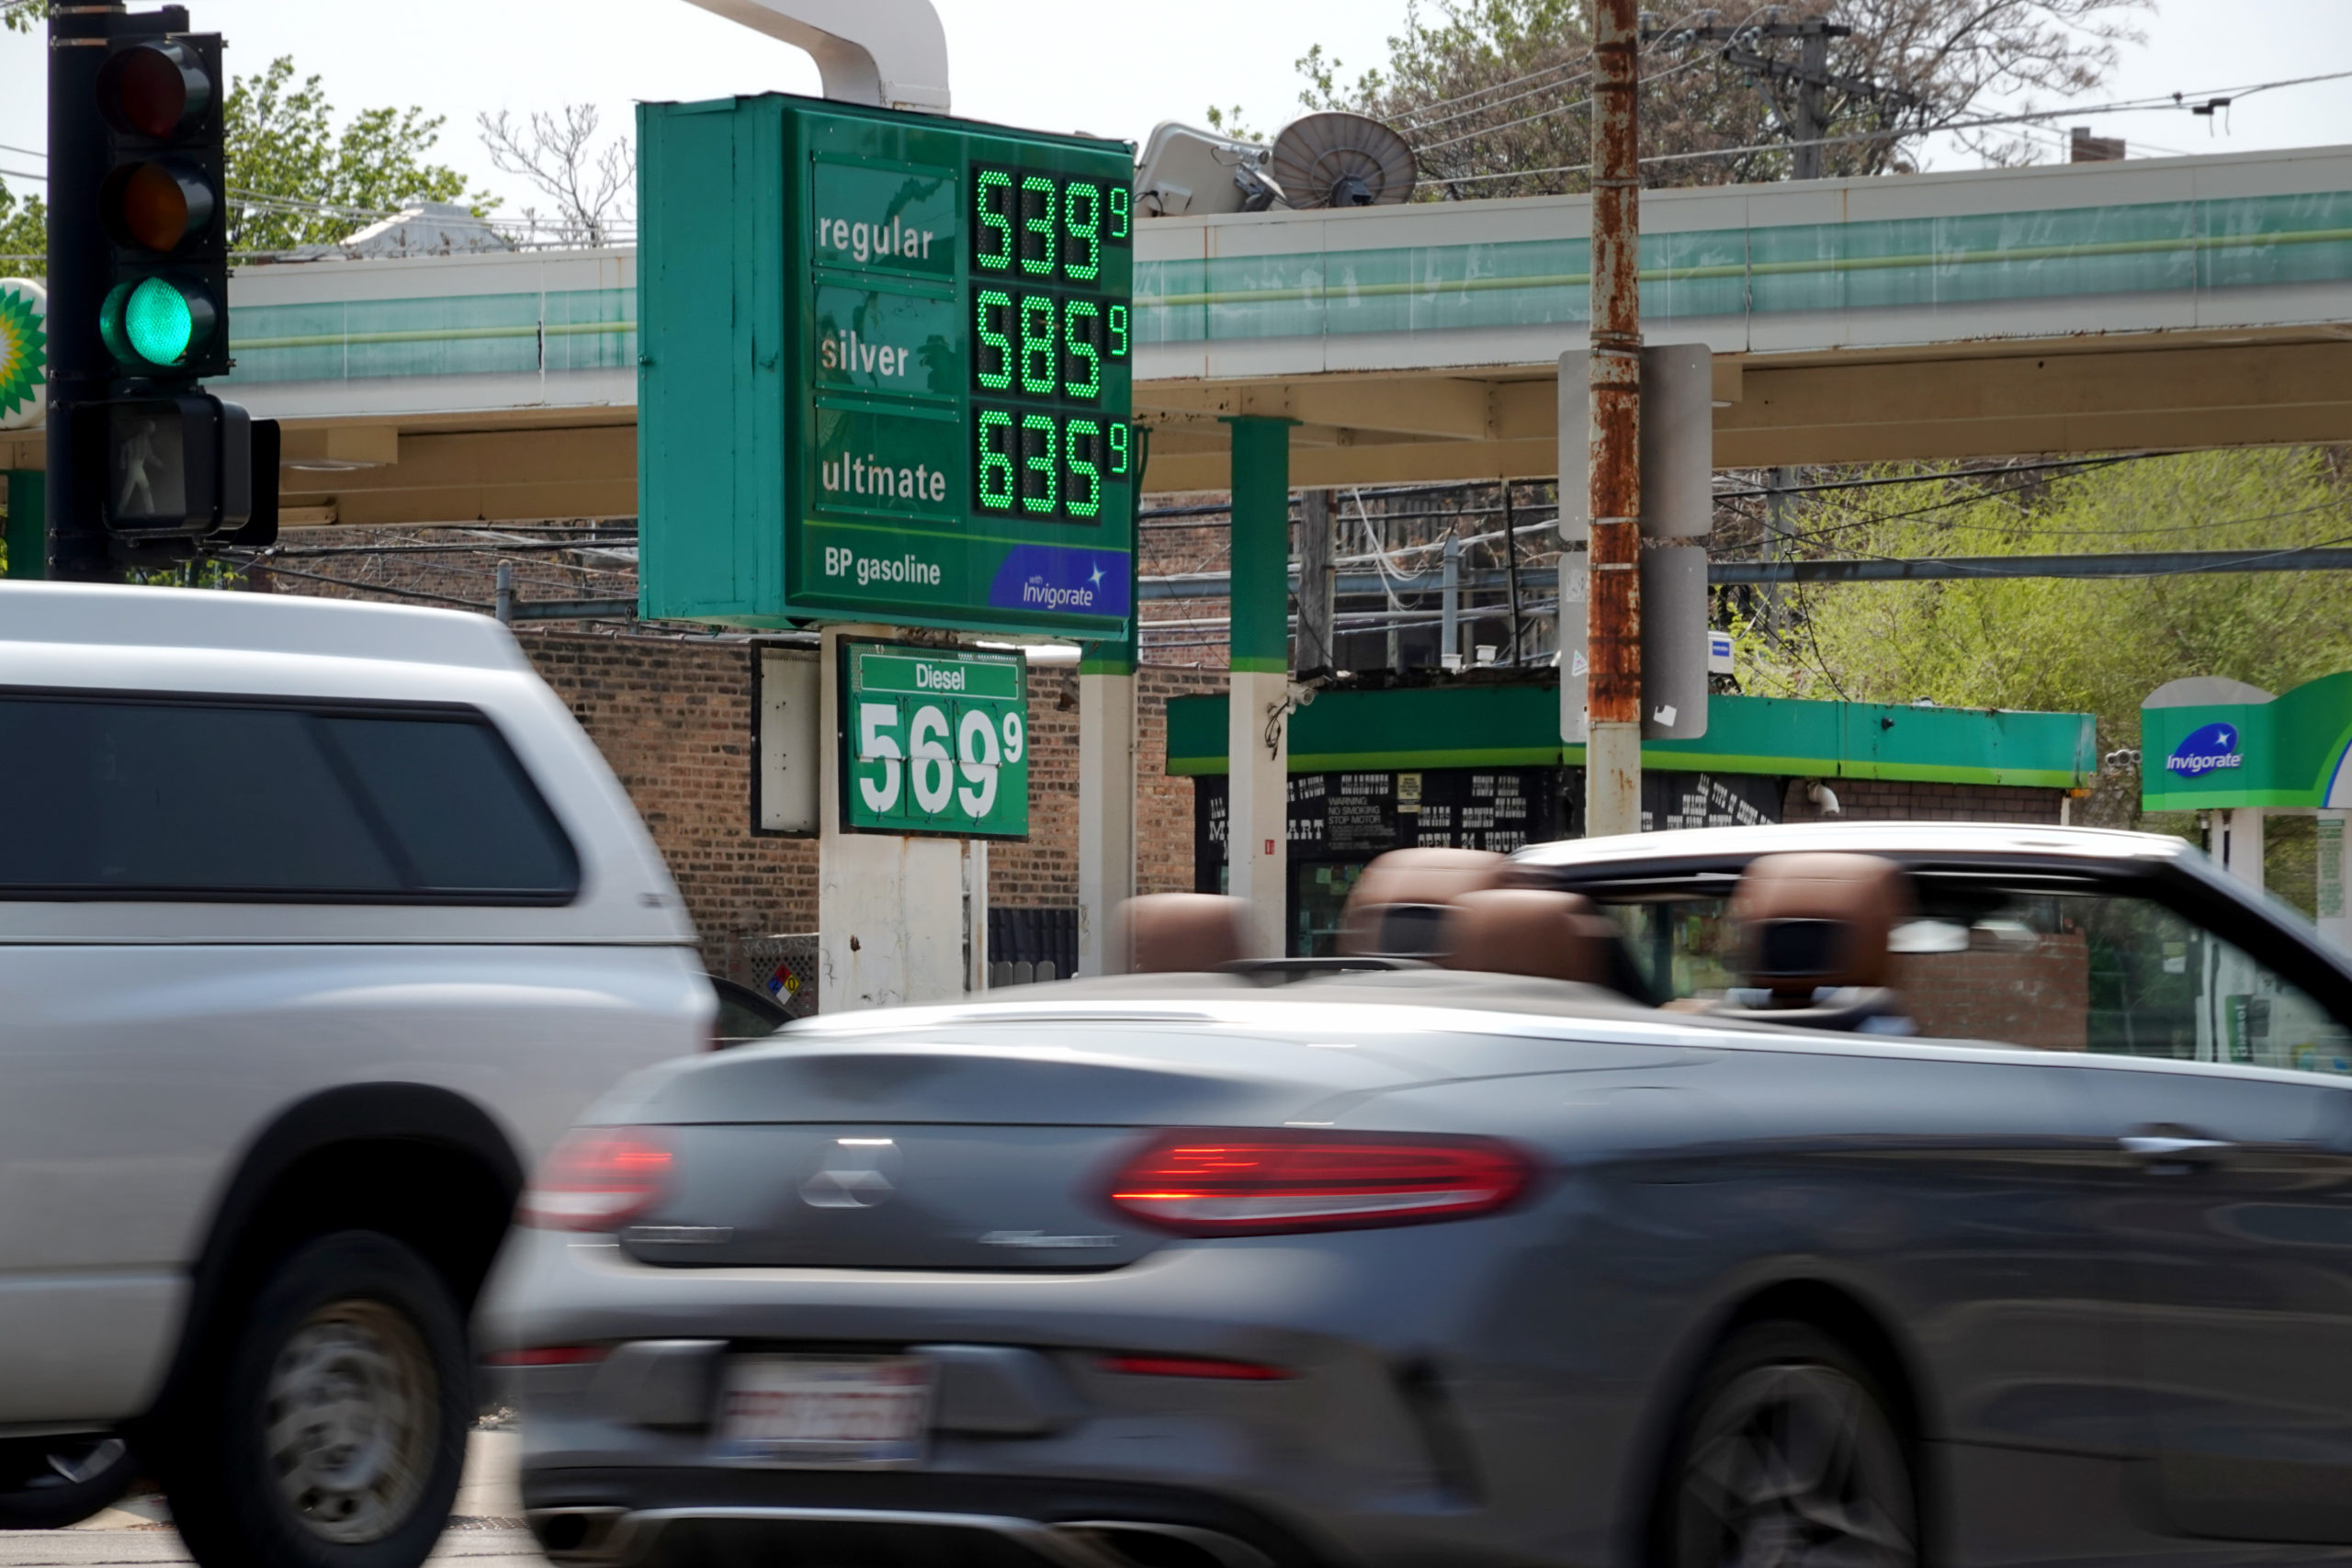 A sign displays gas prices at a gas station on Tuesday in Chicago, Illinois. (Scott Olson/Getty Images)